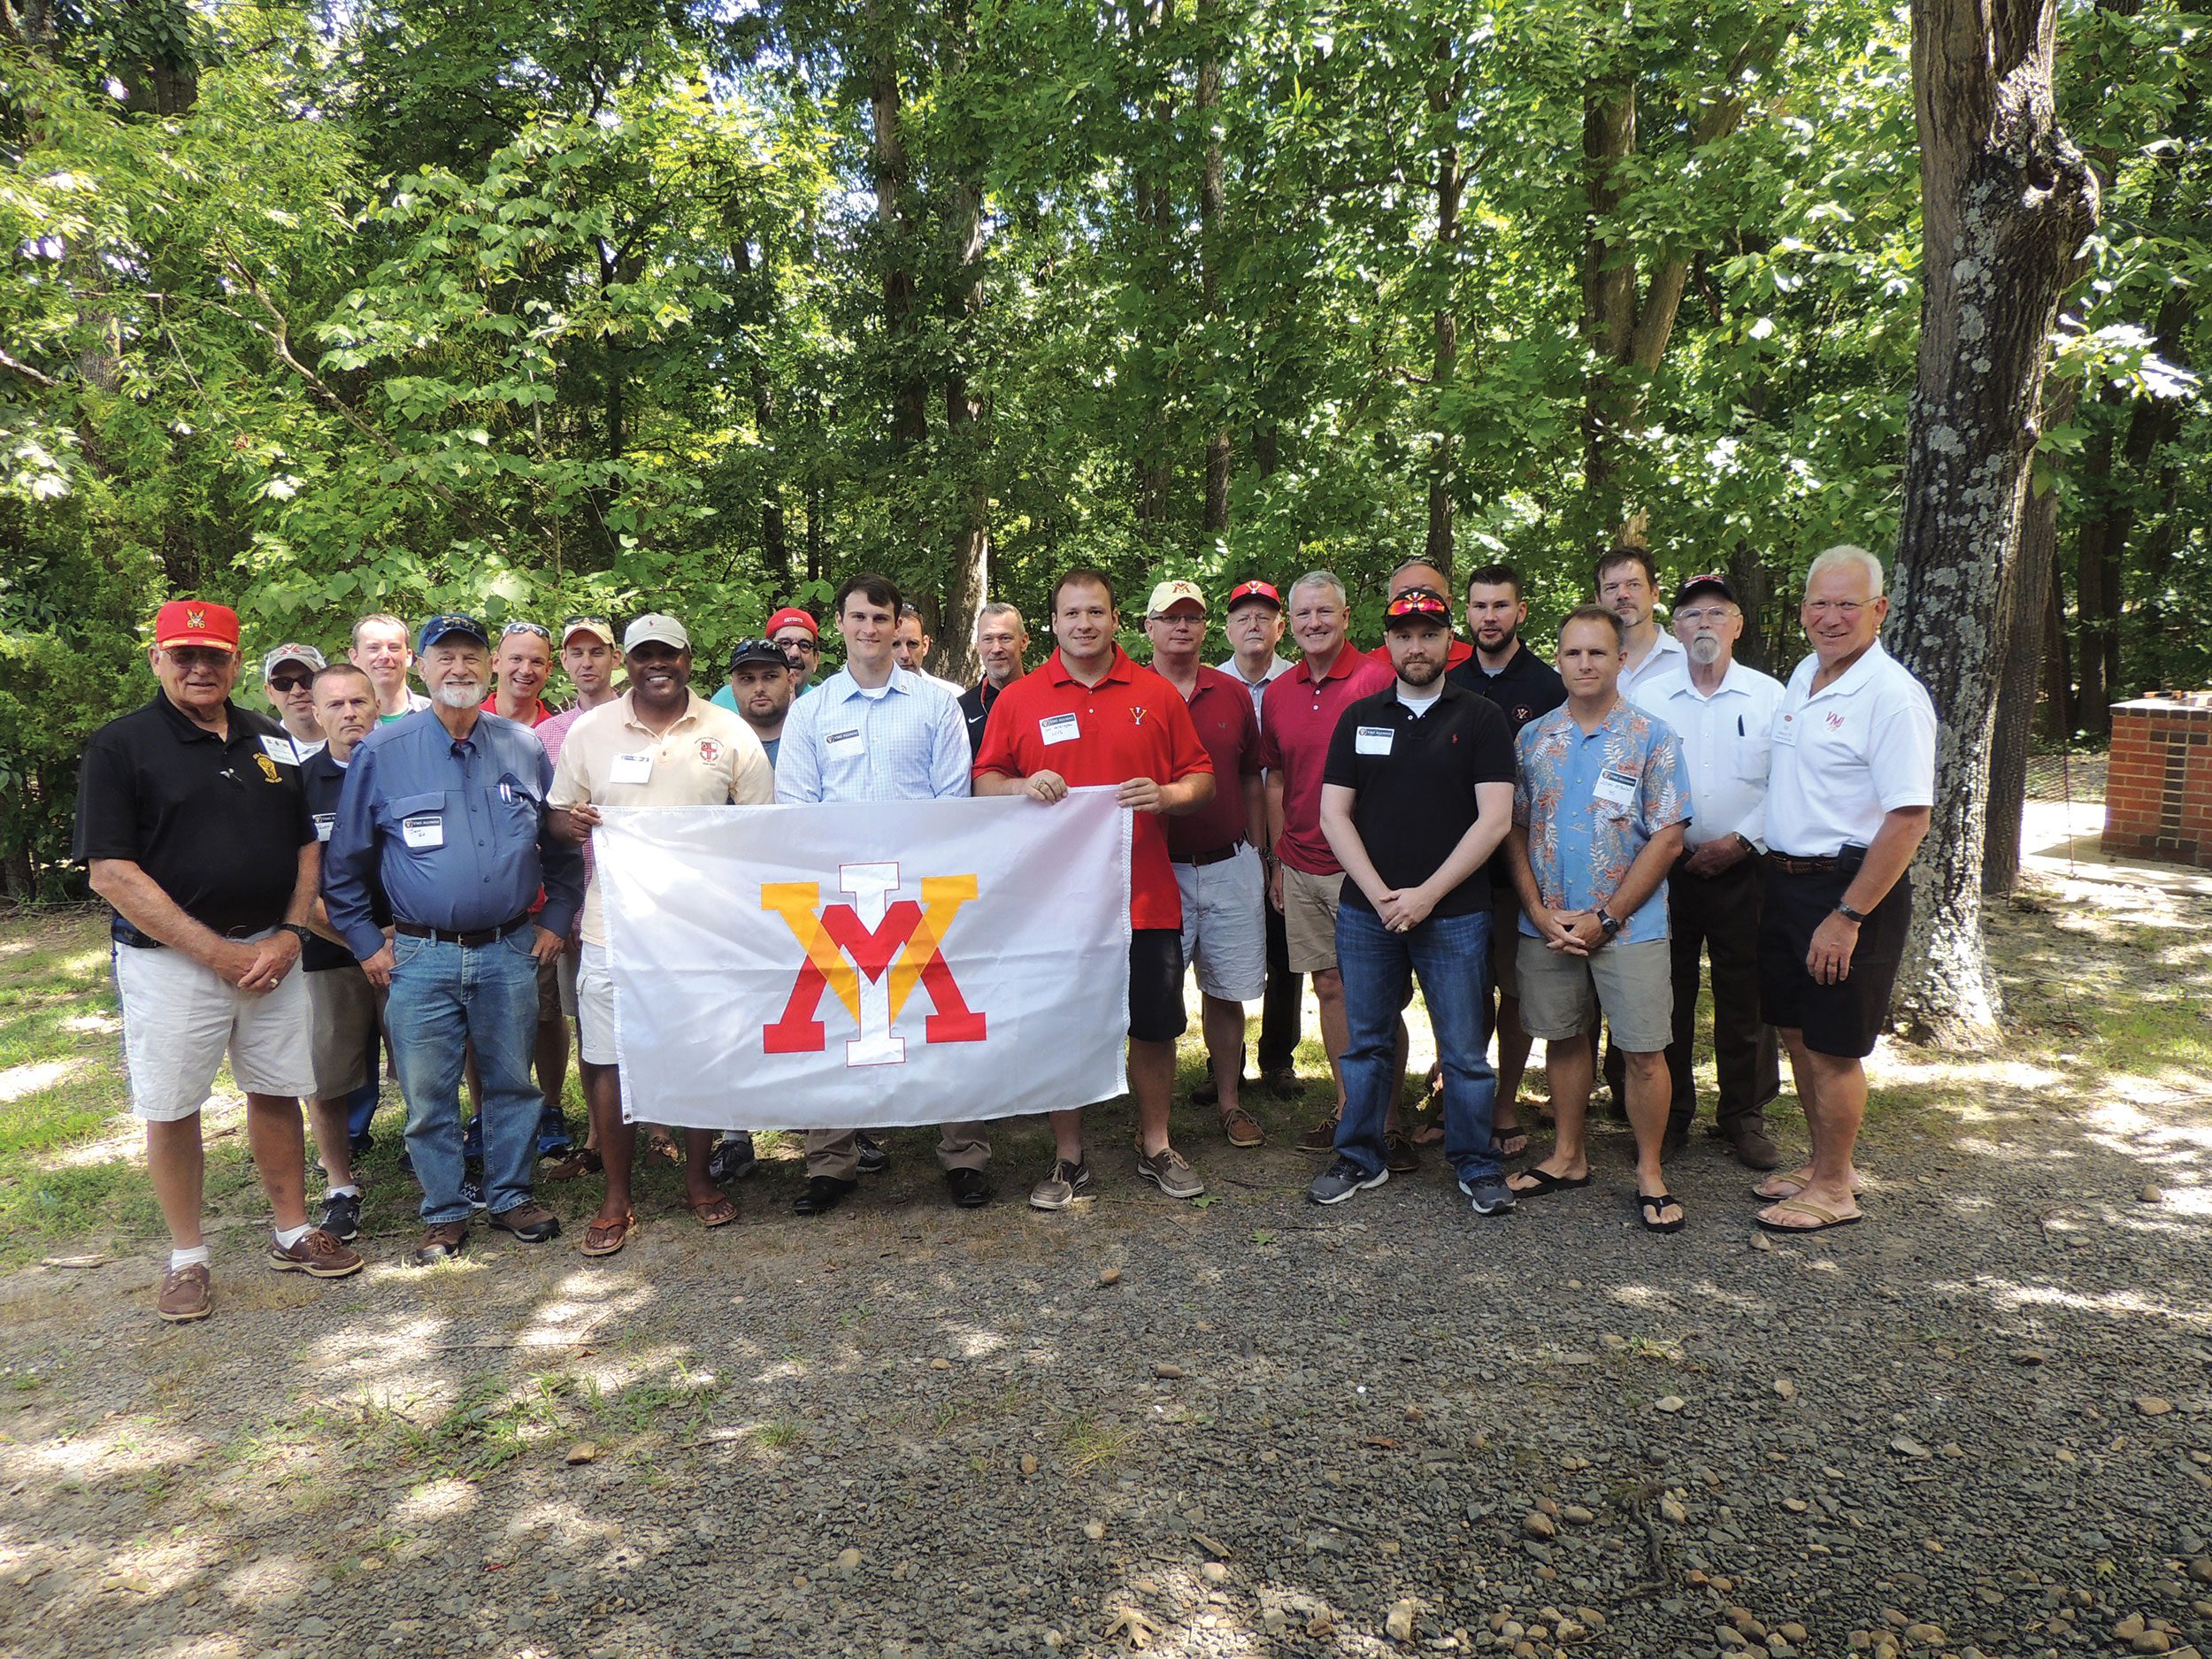 Group of alumni posing with VMI flag